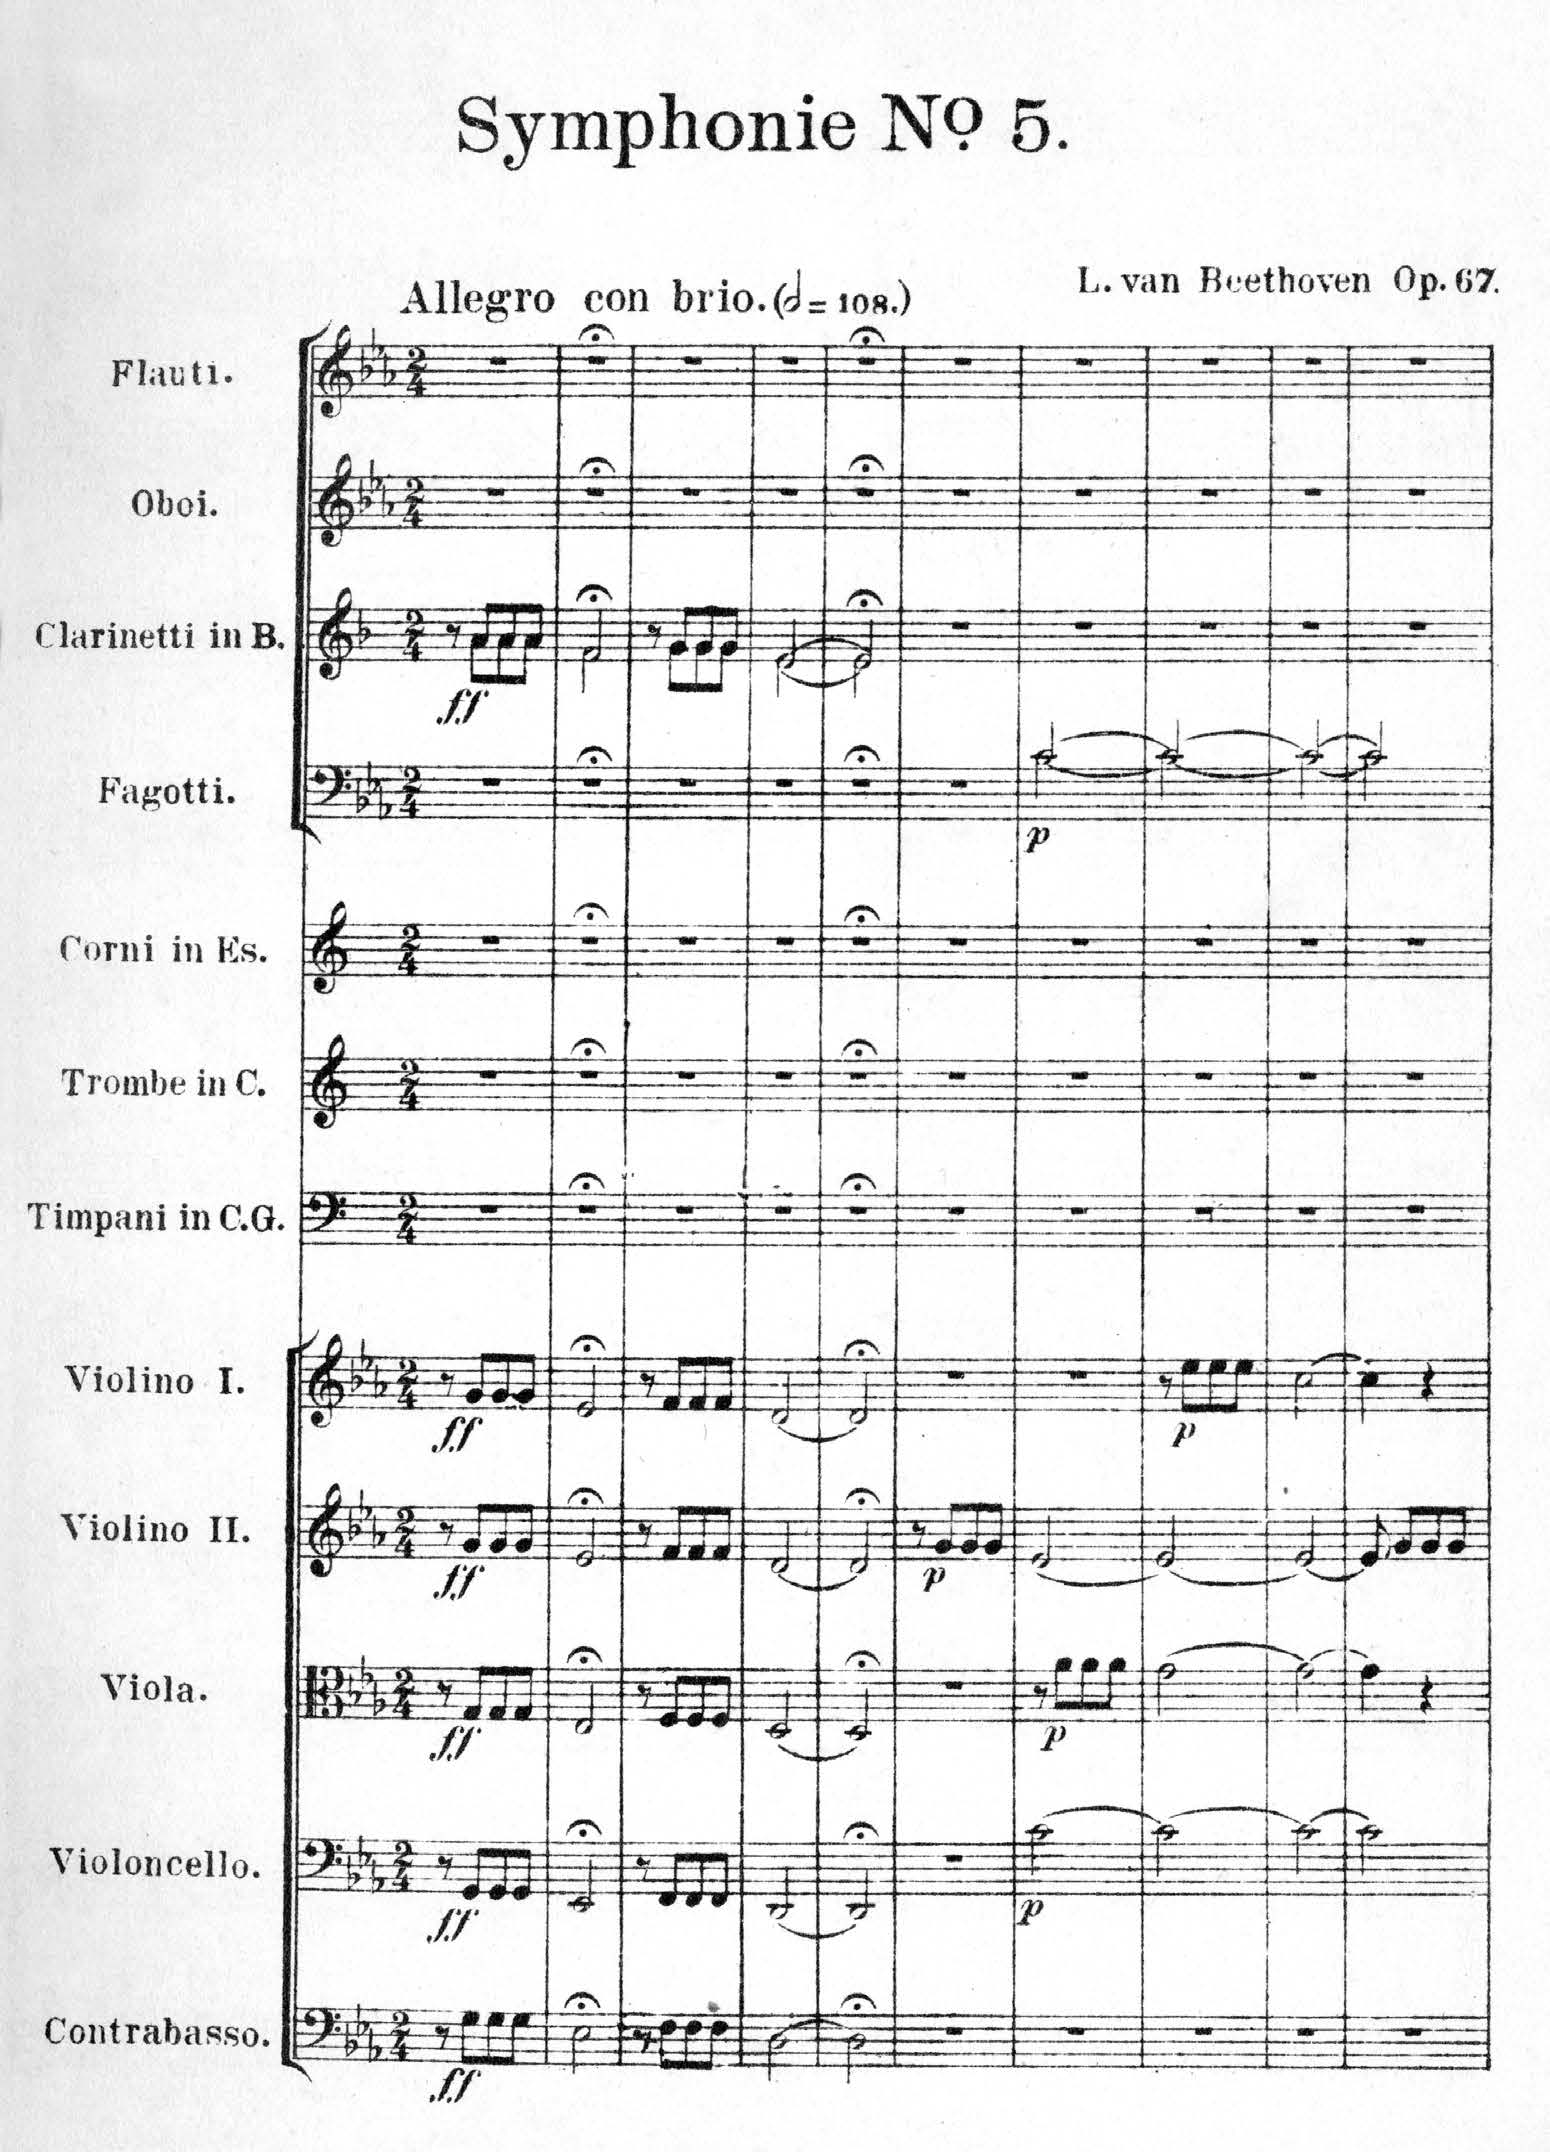 Beethoven's 5th Symphony No. 5—opening bars of the printed score for full orchestra instruments. Courtesy of Alamy Stock Photo